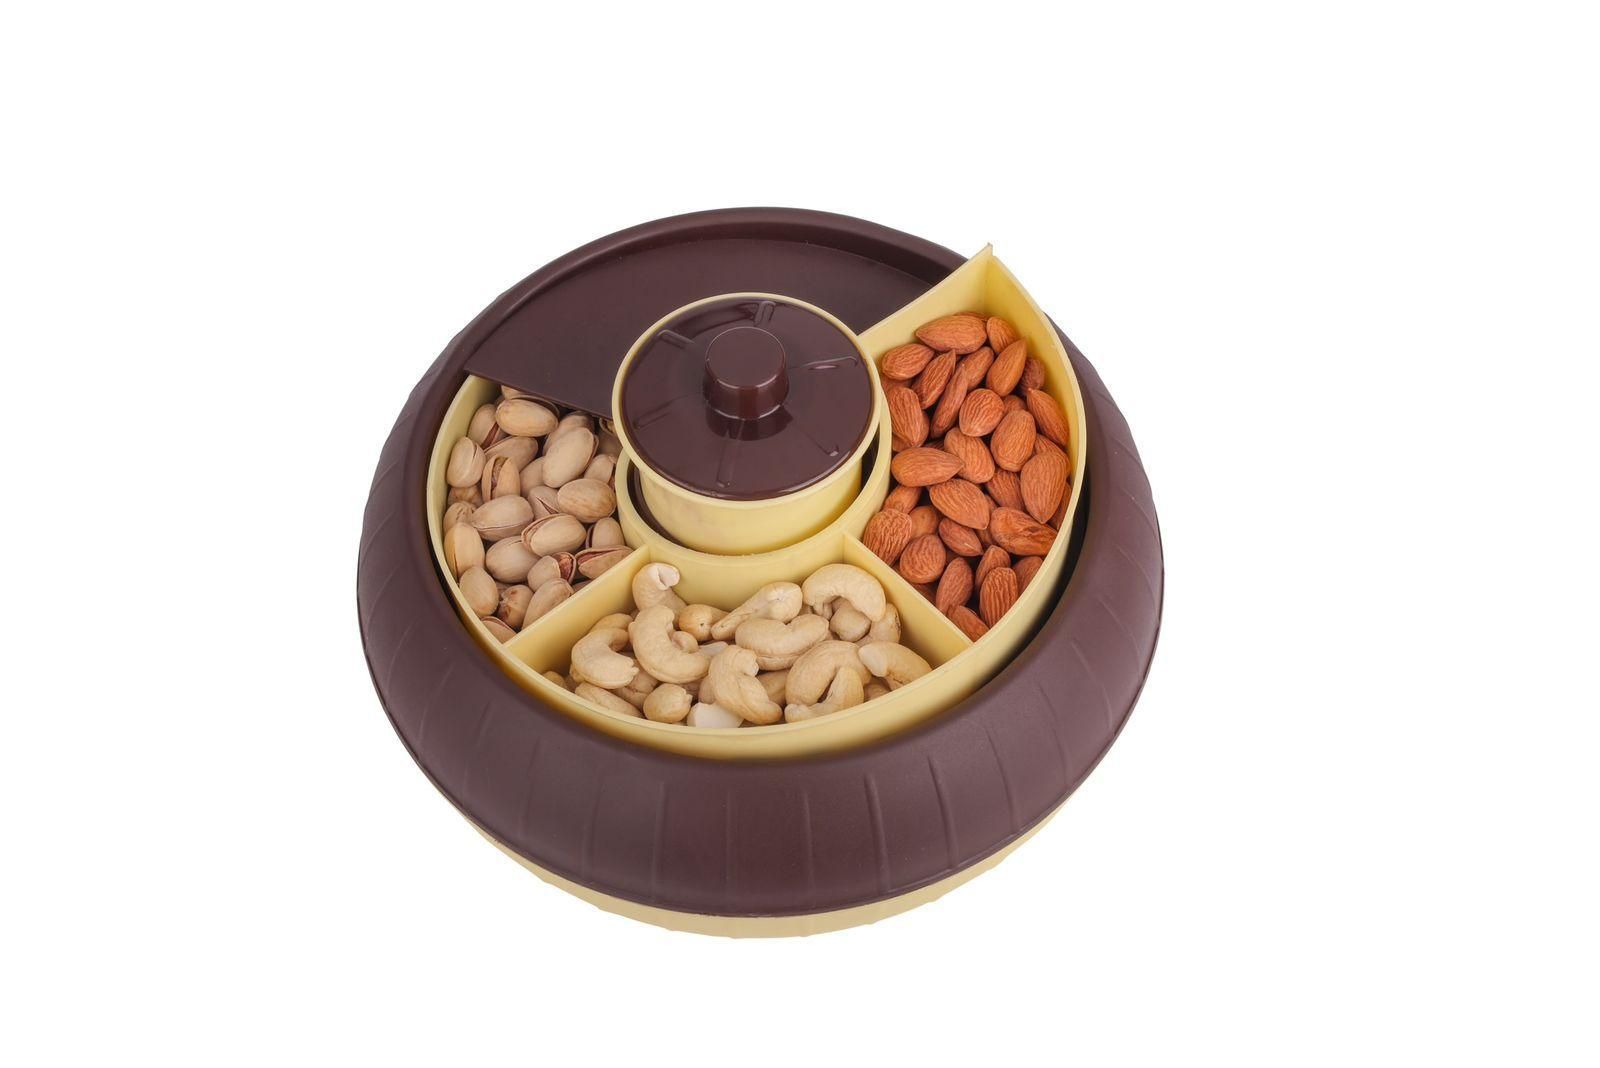 High-quality dried fruit tray